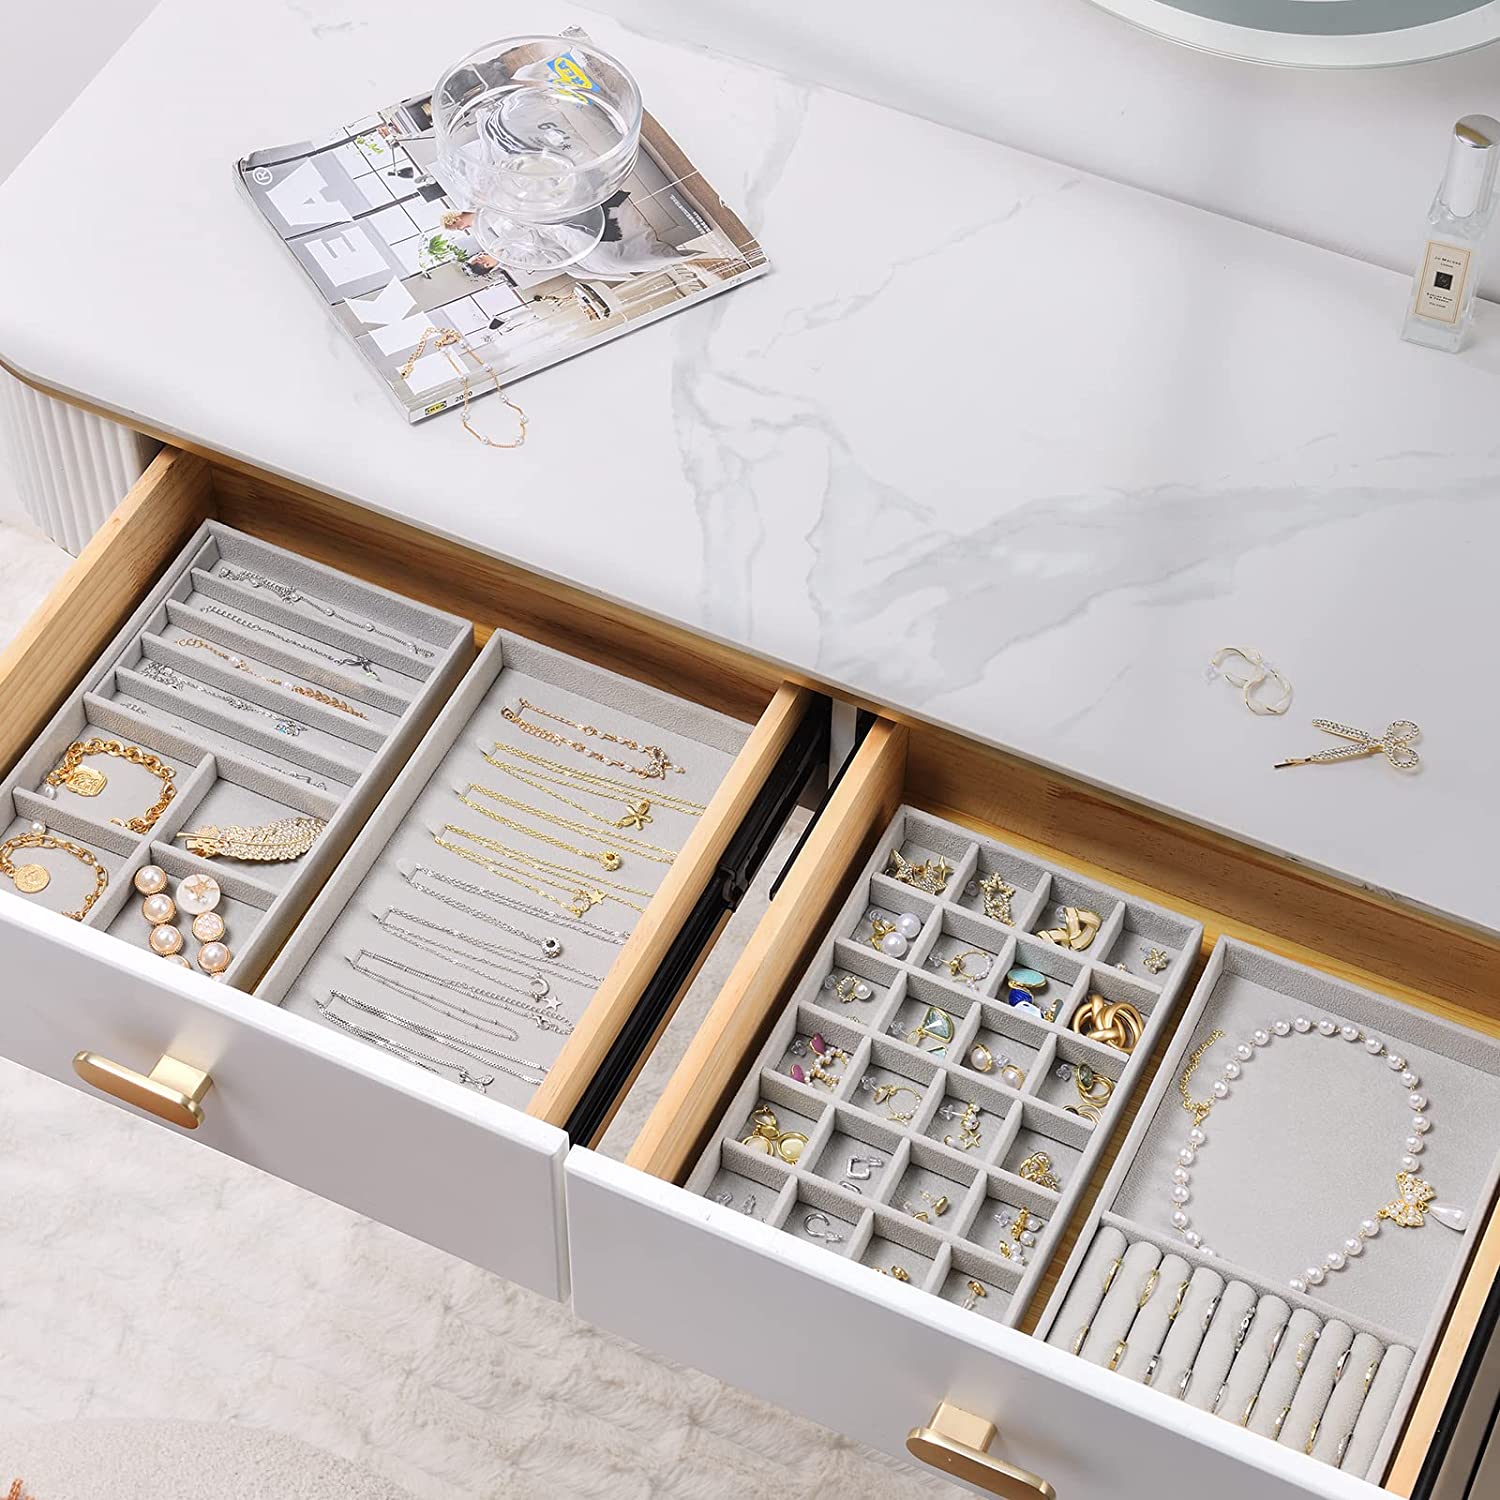 ProCase Earring Organiser Jewellery Organizer Box with 3 Drawers, Acrylic Stackable Jewelry Holder Clear Earring Storage Case with Adjustable Trays